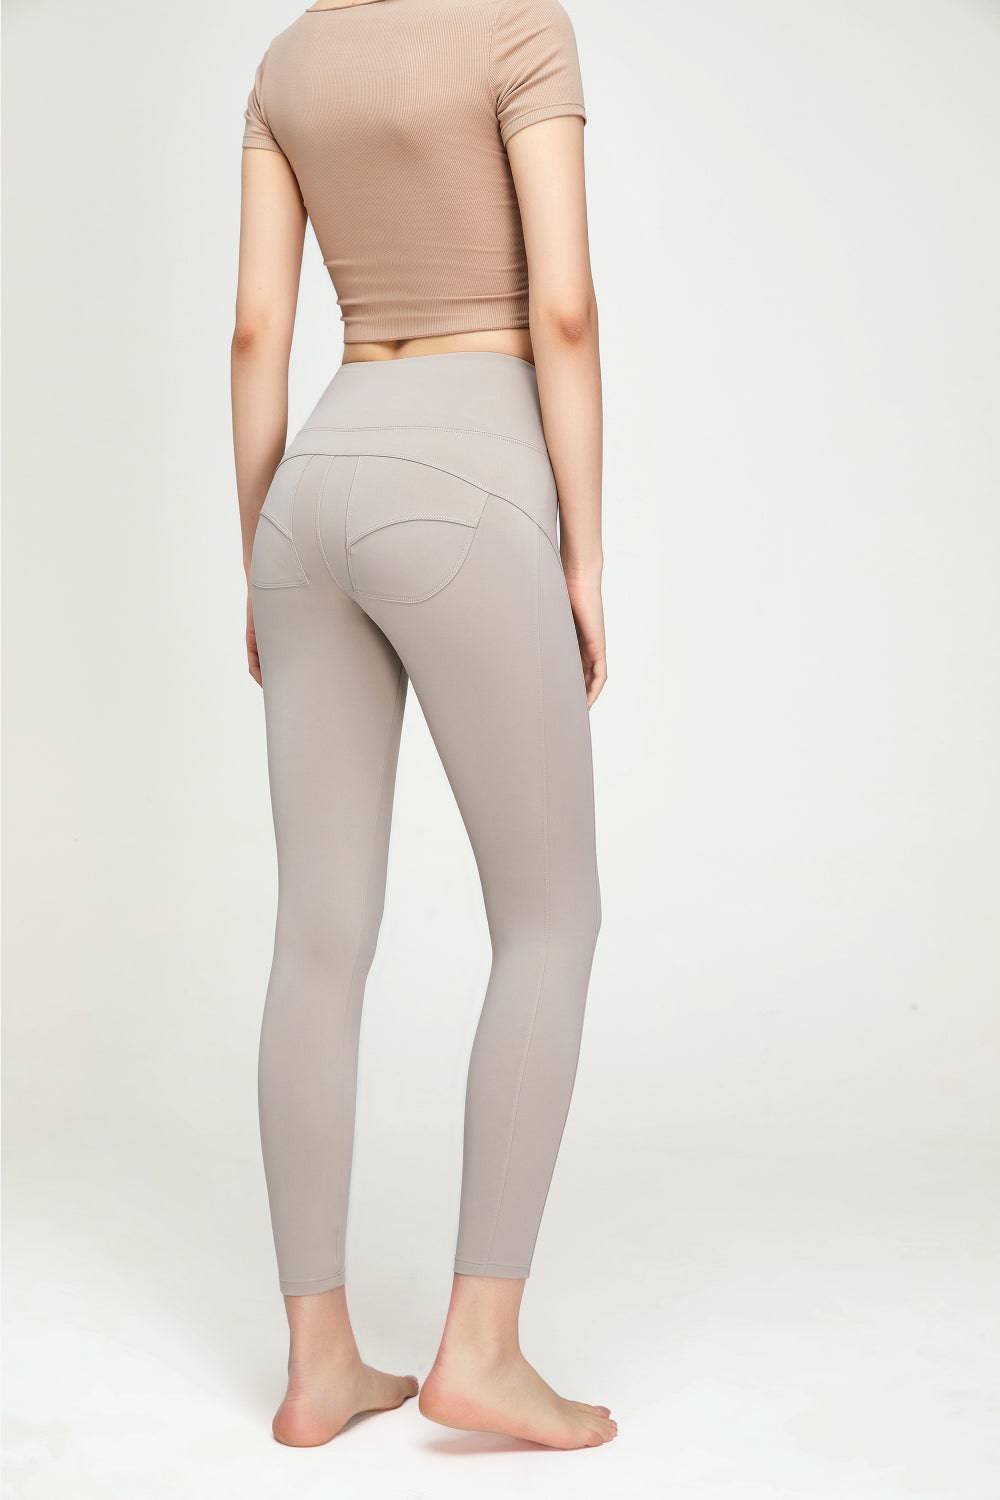 "Seam Detail Wide Waistband Sports Leggings - Ignite Your Passion for Fitness with Ethereal Grace and Subtle Sophistication - Embrace the Power of True Romance" - Guy Christopher